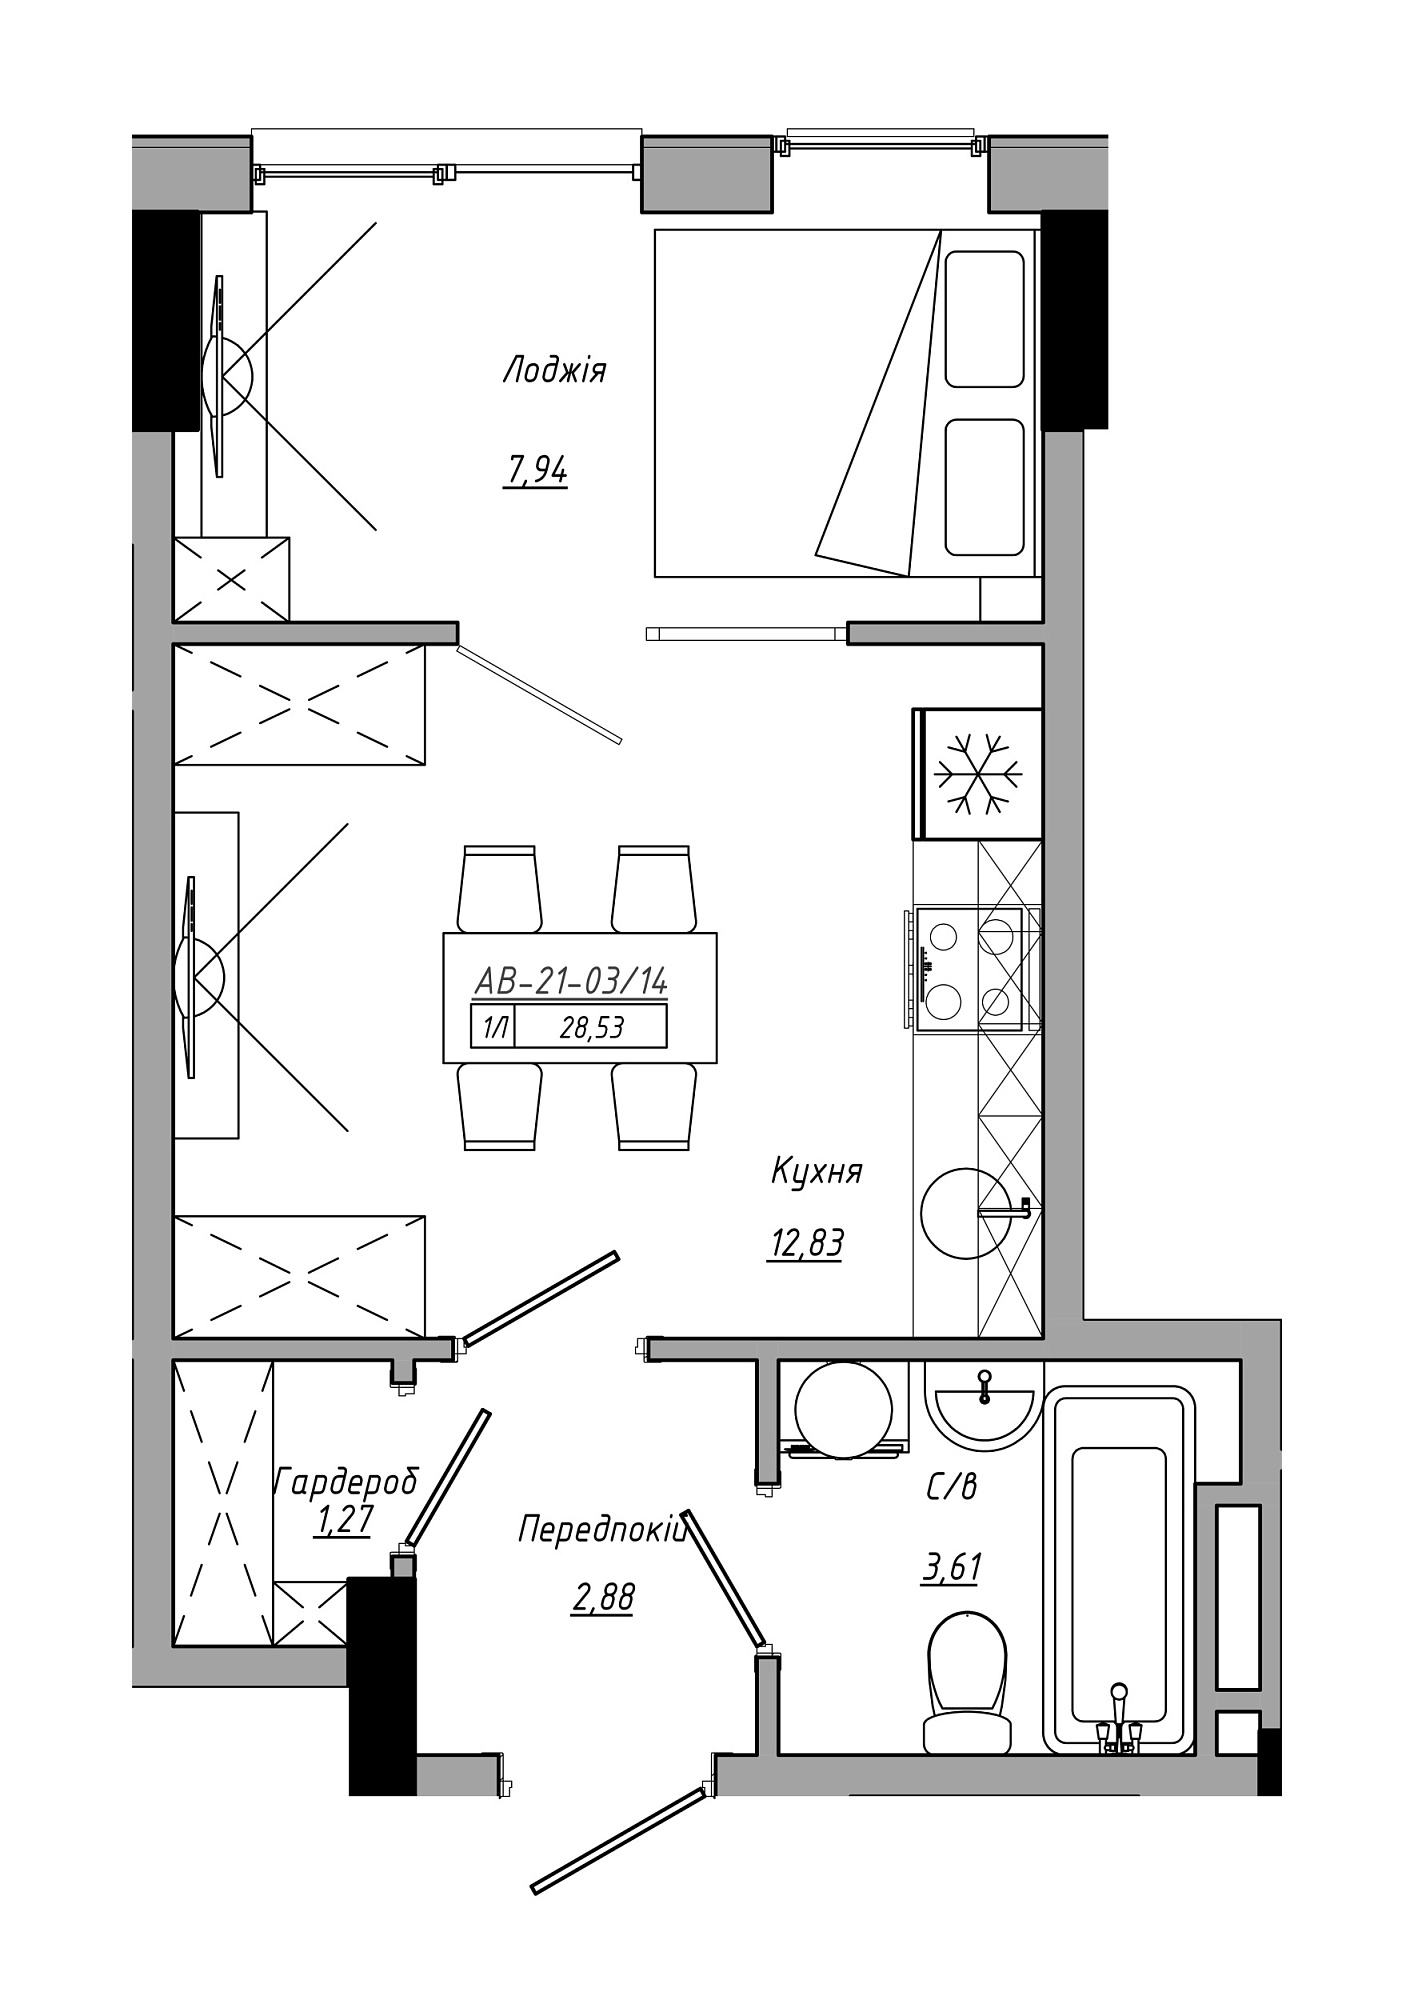 Planning 1-rm flats area 28.53m2, AB-21-03/00014.